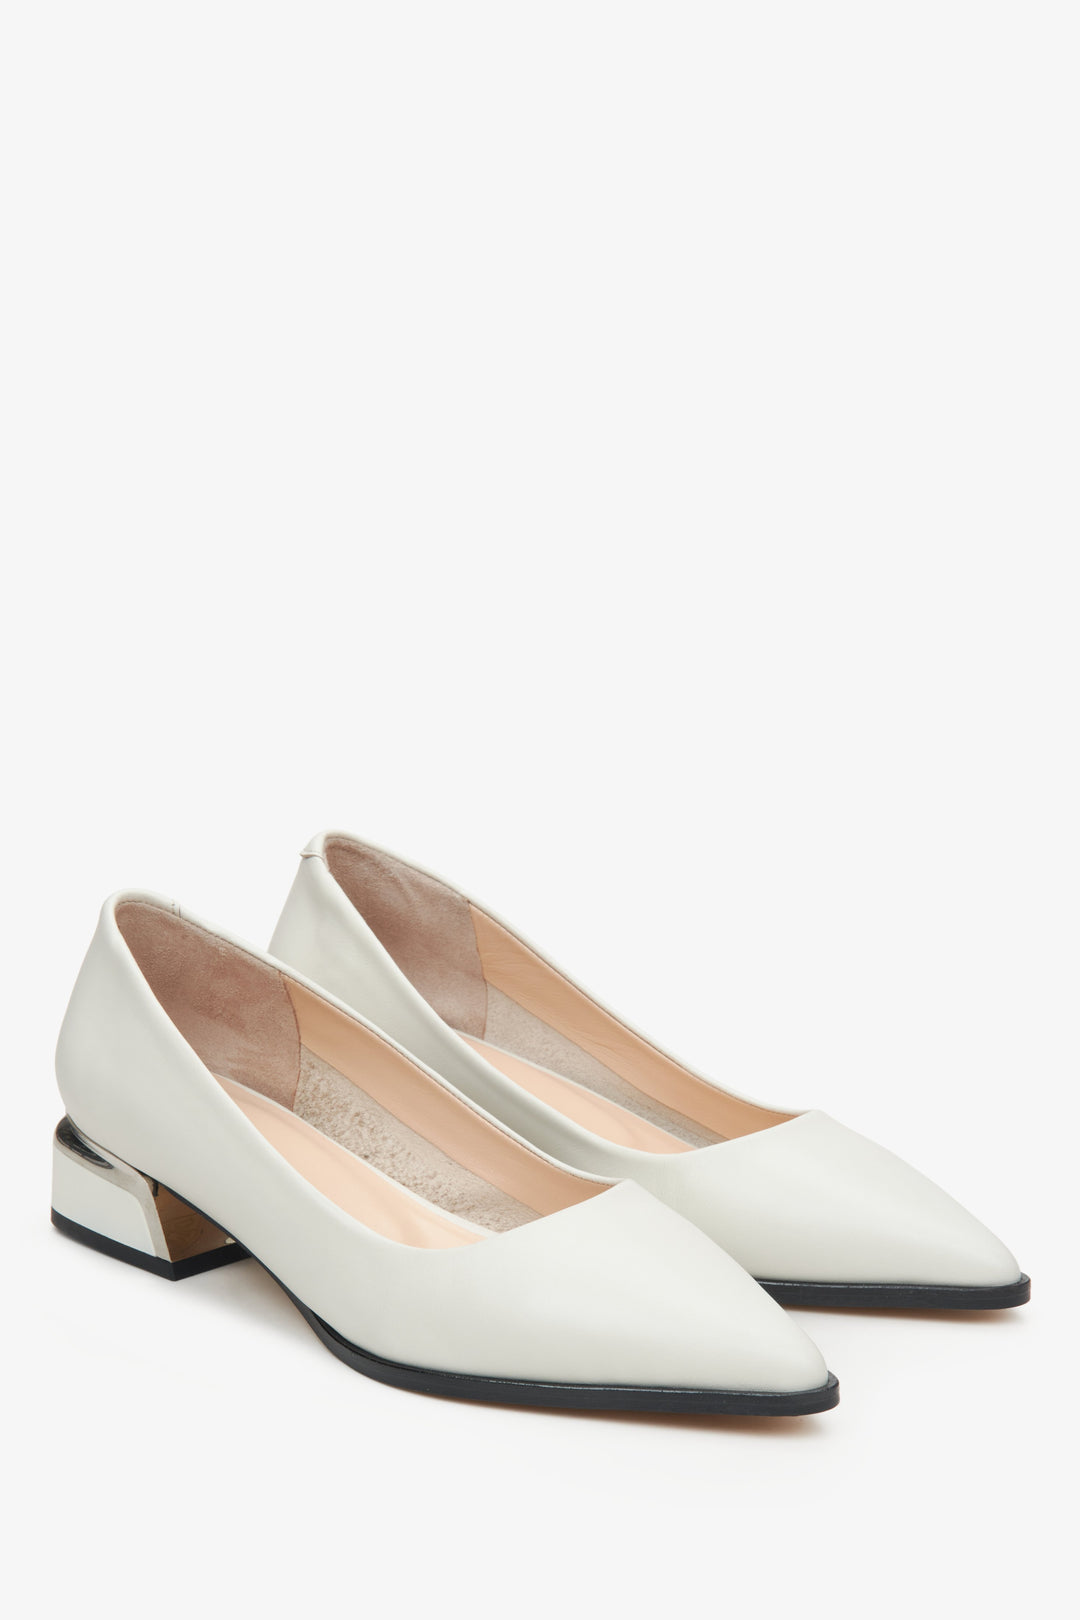 Women's leather light beige pumps by Estro with a pointed toe.